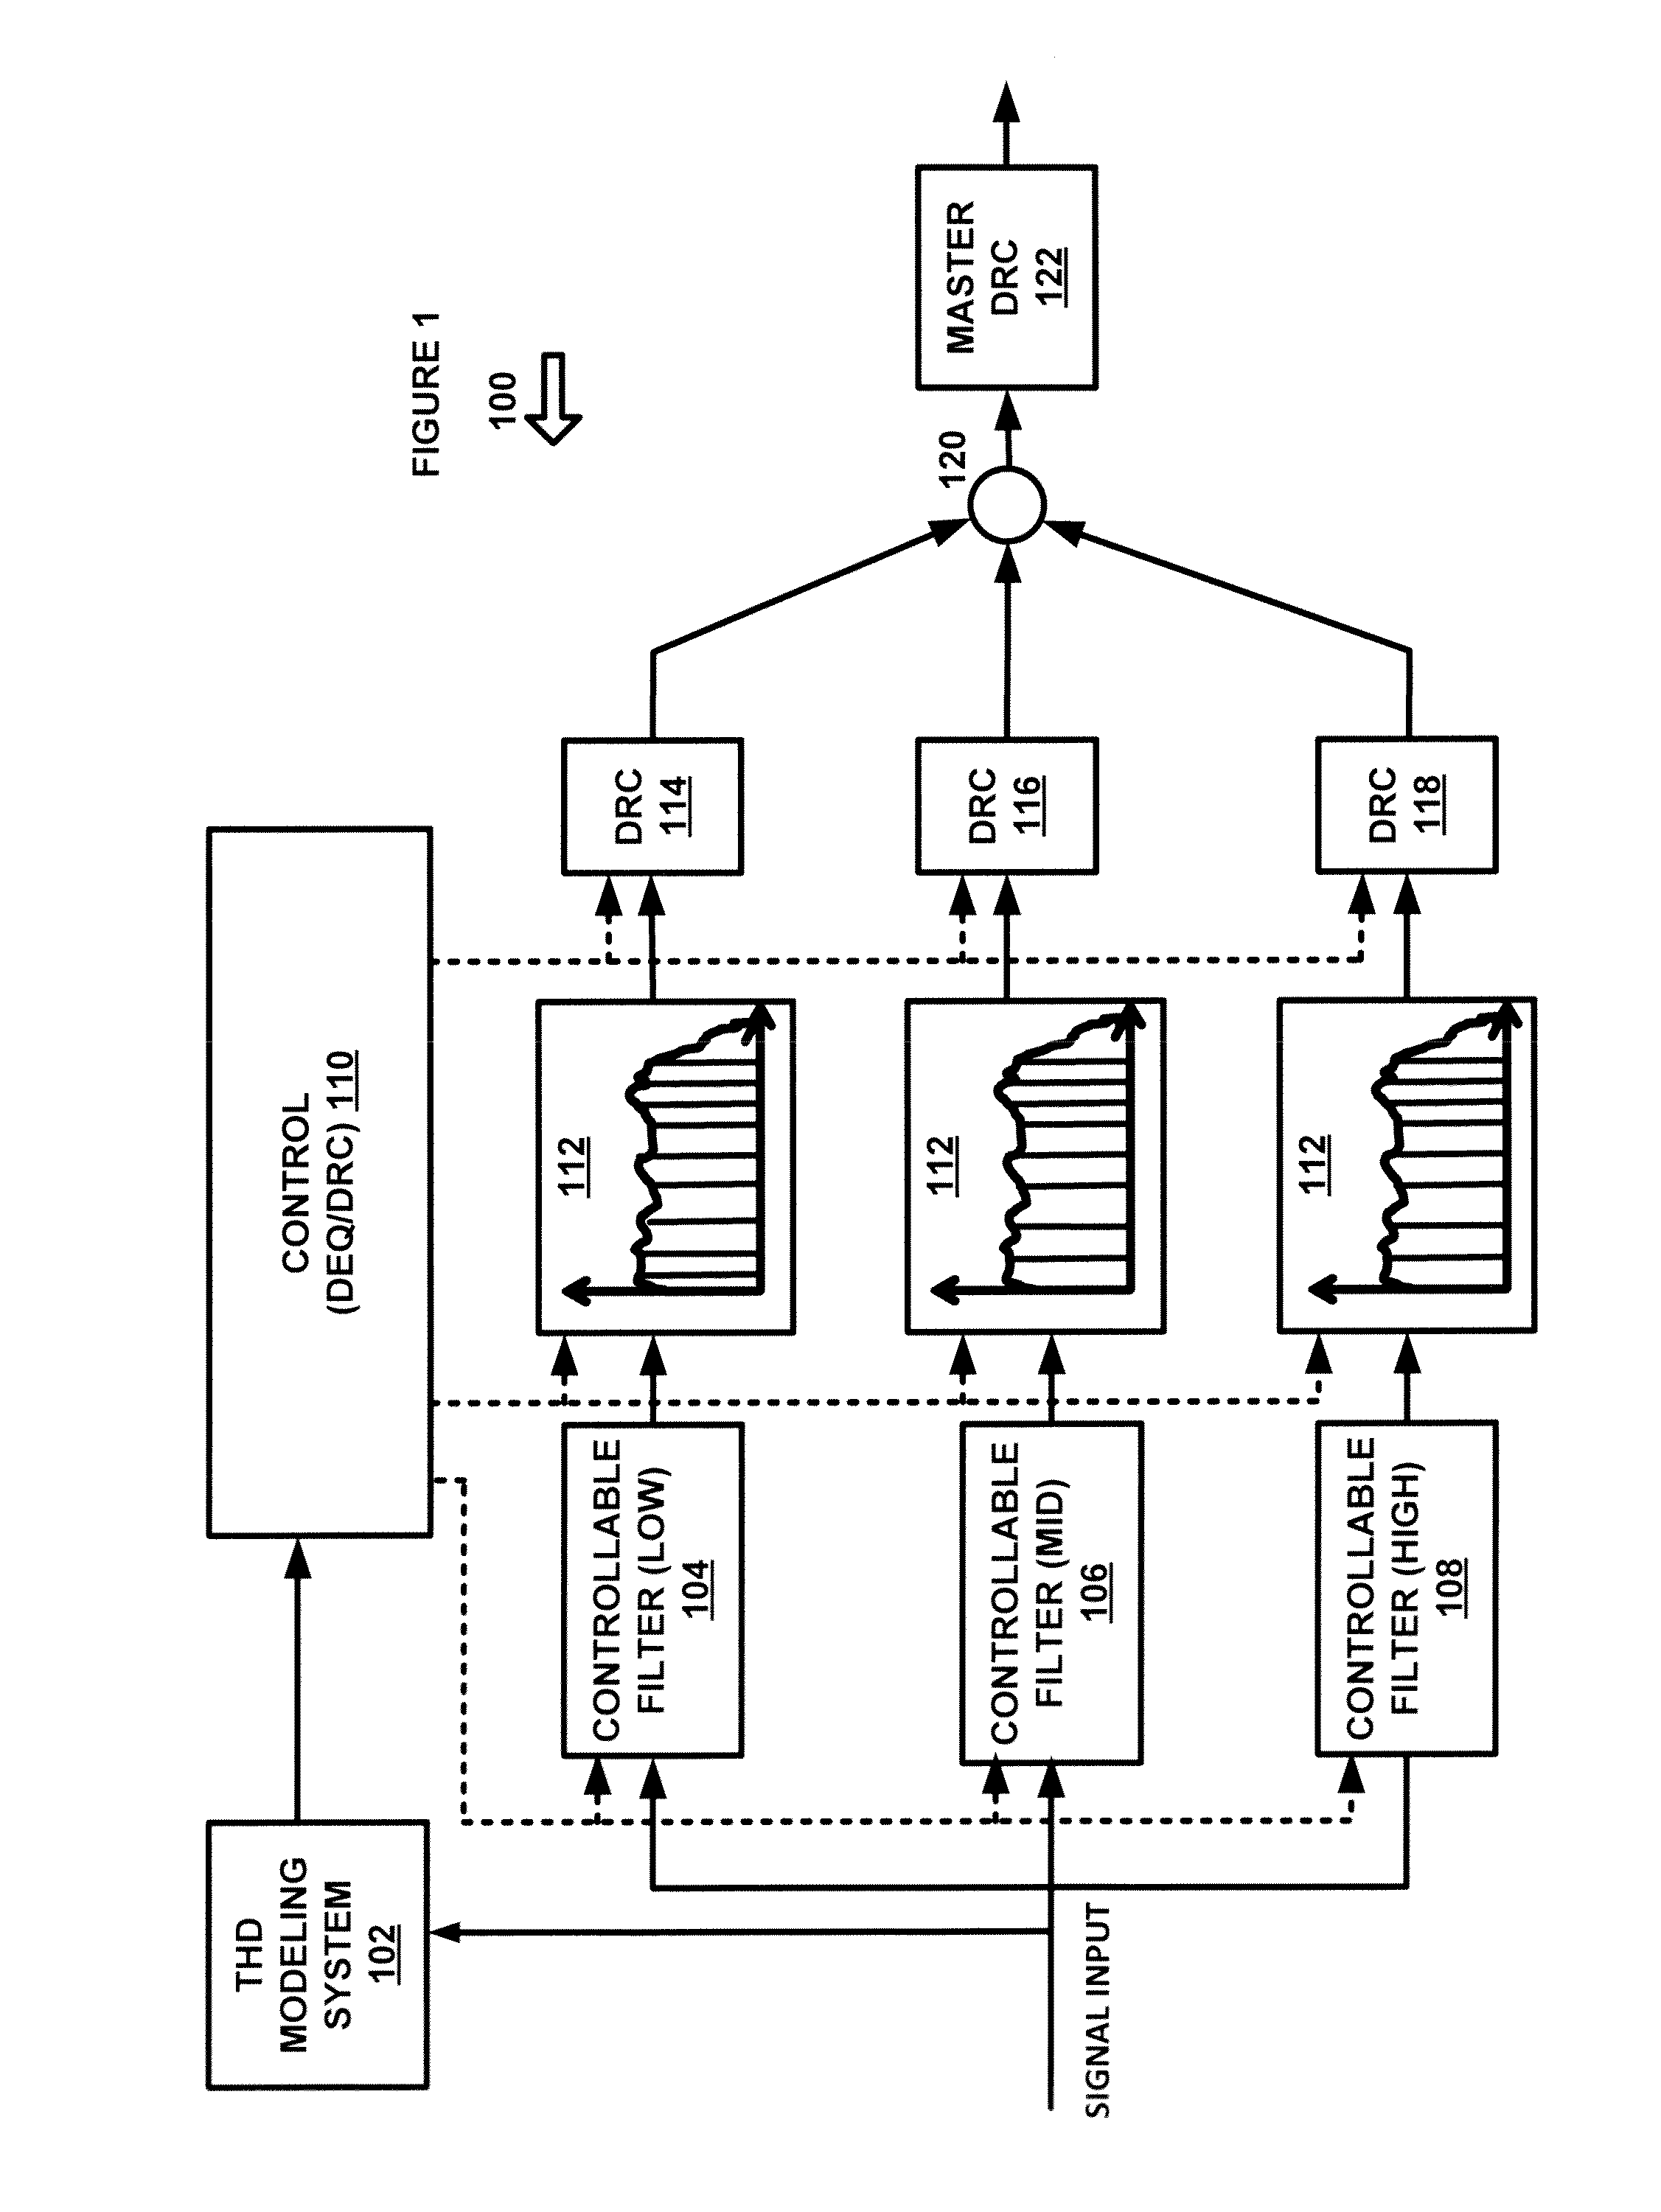 System and method for dynamic range compensation of distortion